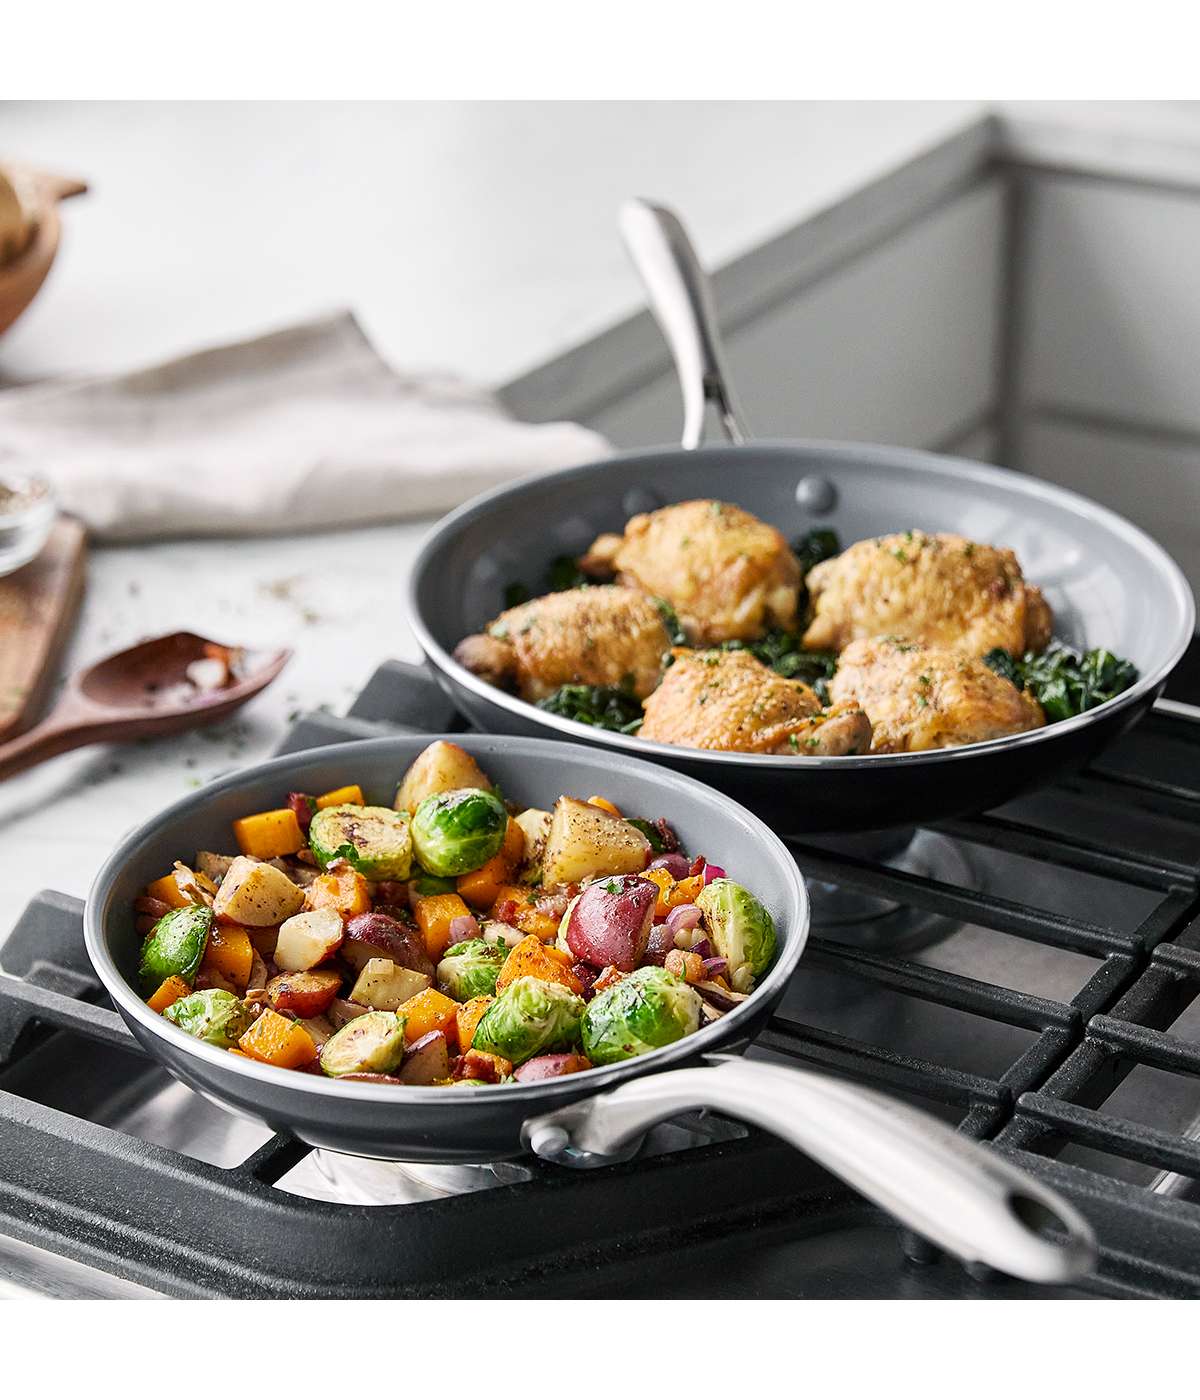 GreenLife Classic Range Open Fry Pan - Shop Frying Pans & Griddles at H-E-B